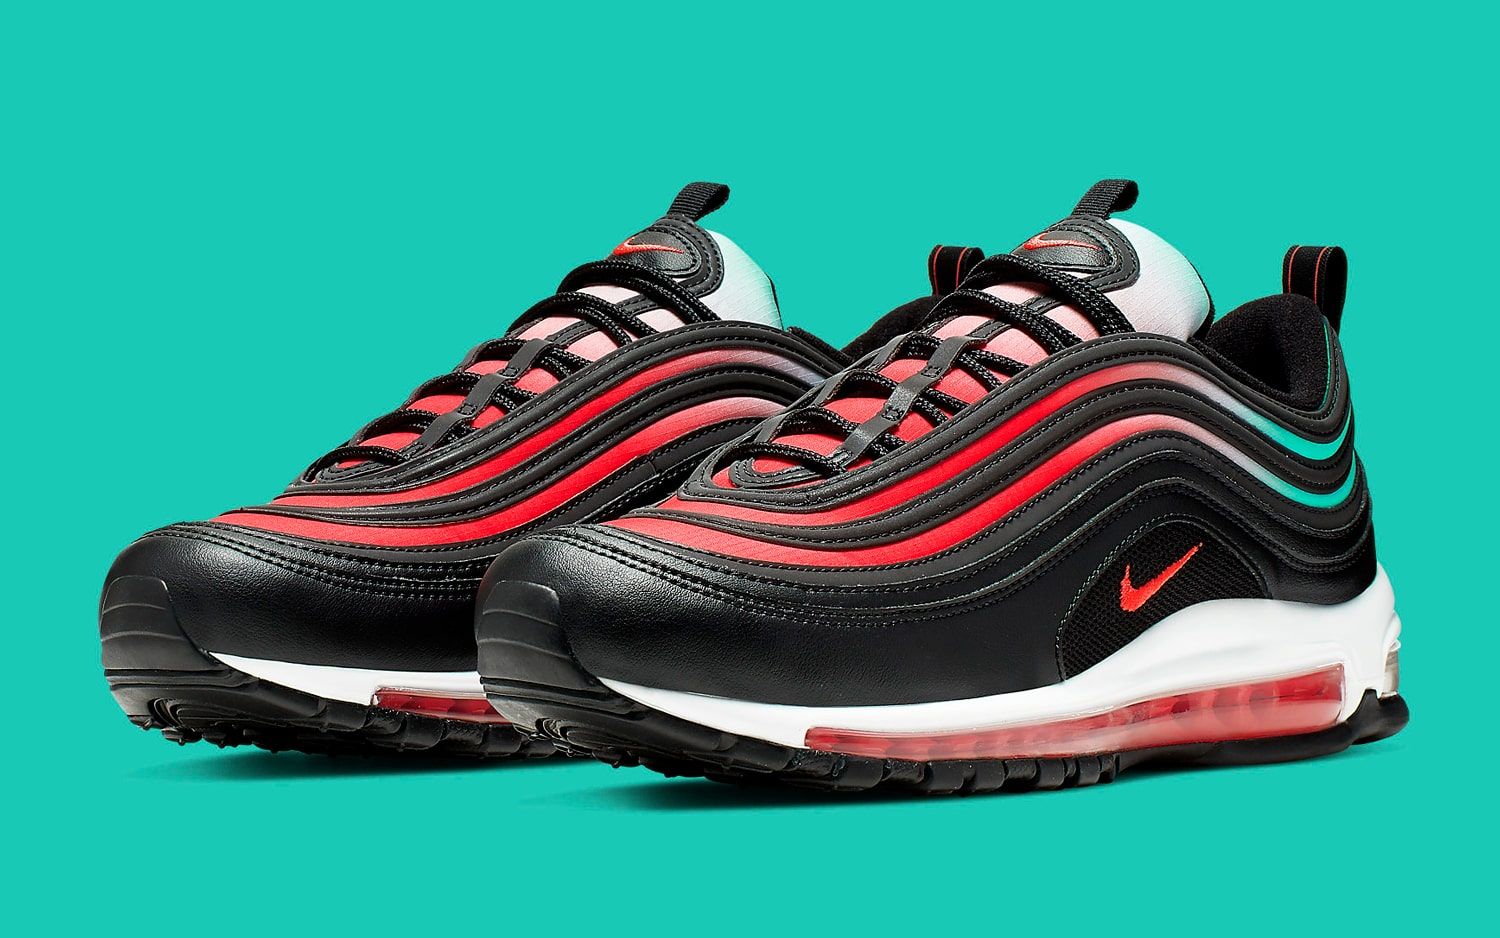 Gradient-Laden Air Max 97s Surface in 